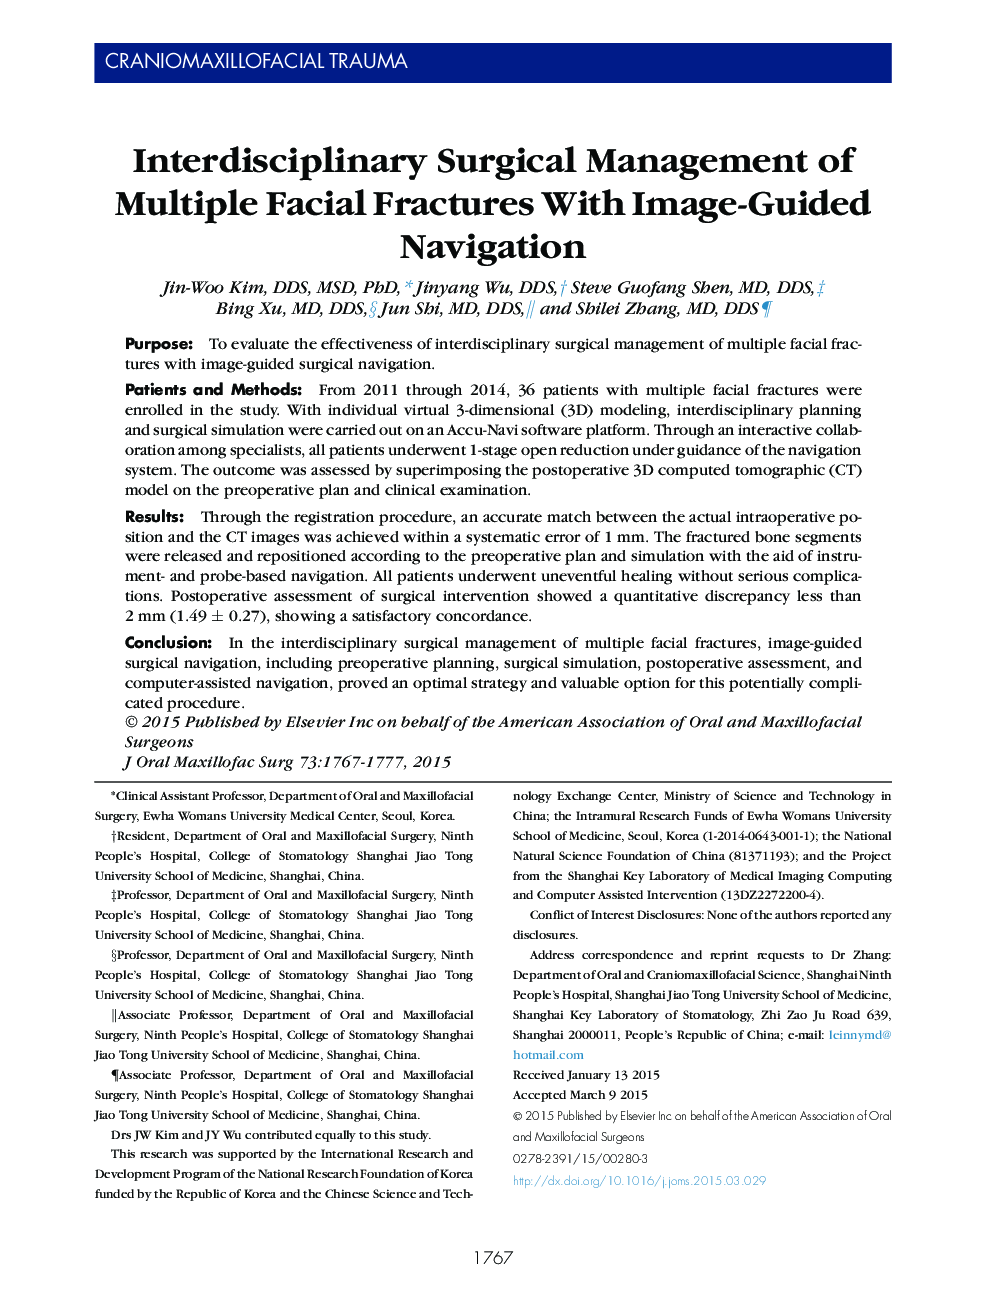 Interdisciplinary Surgical Management of Multiple Facial Fractures With Image-Guided Navigation 